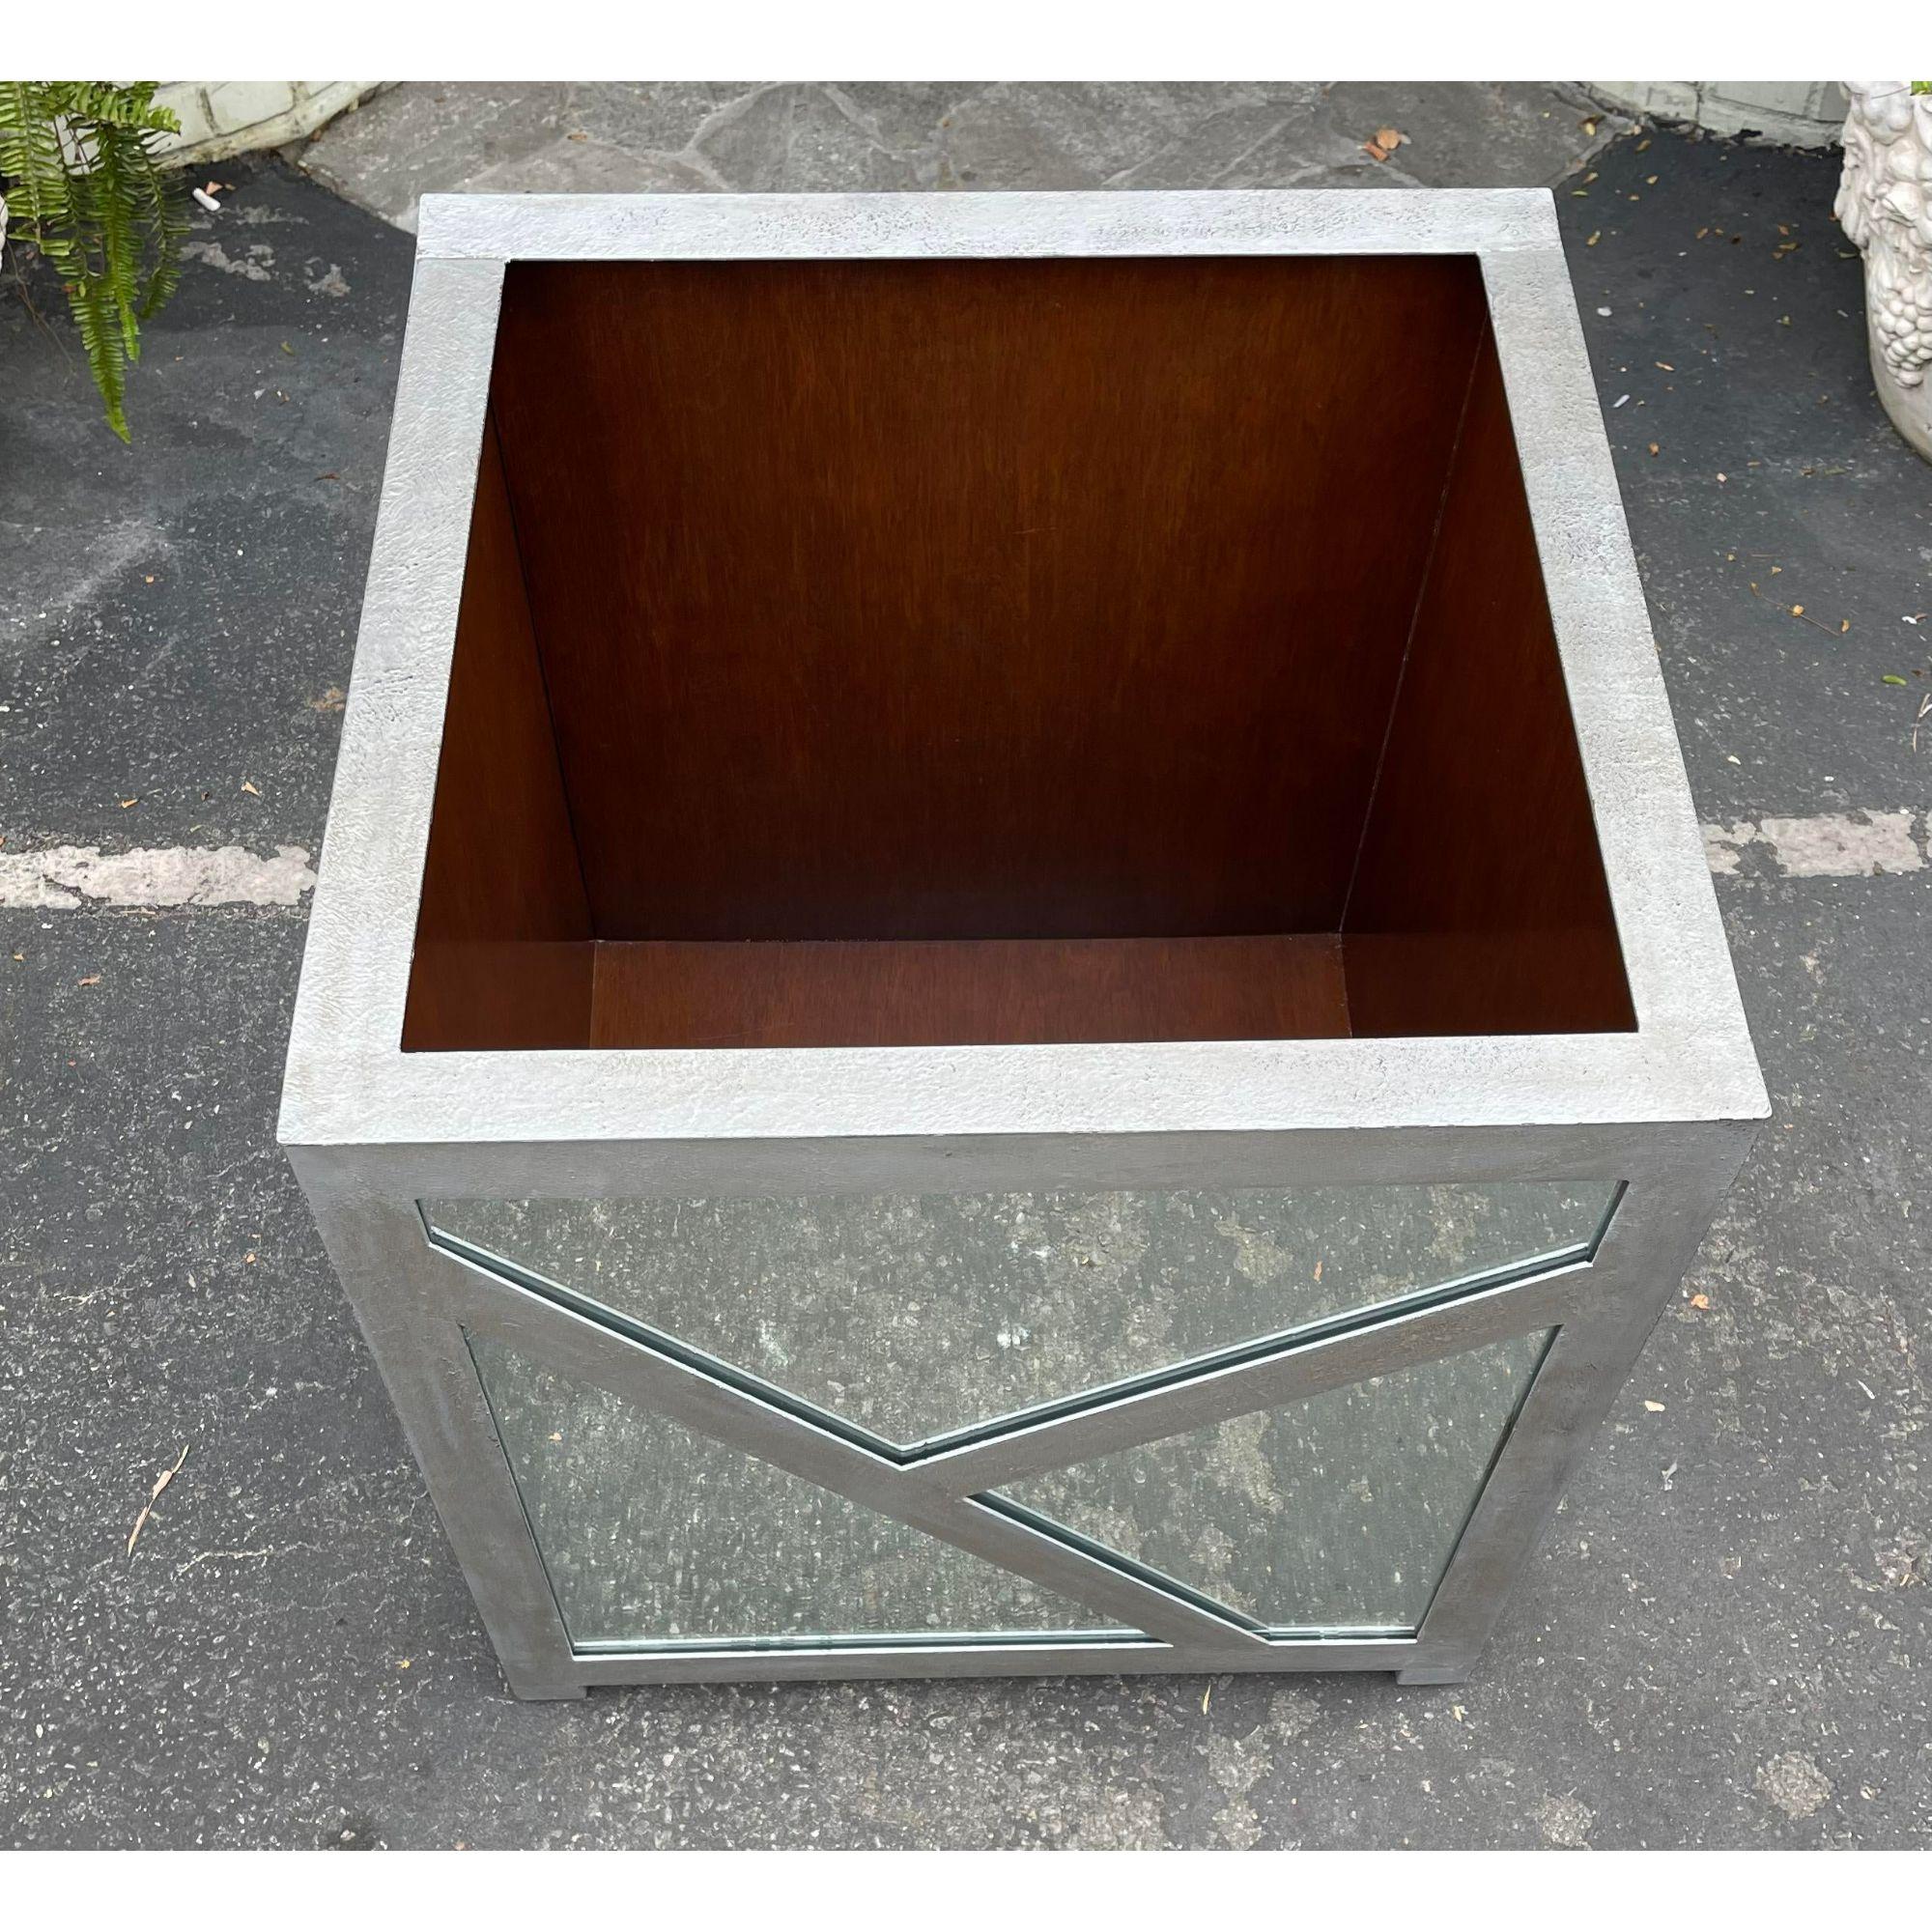 20th Century Art Deco Style Mahogany Lined Mirrored Iron Planter, 1990s For Sale